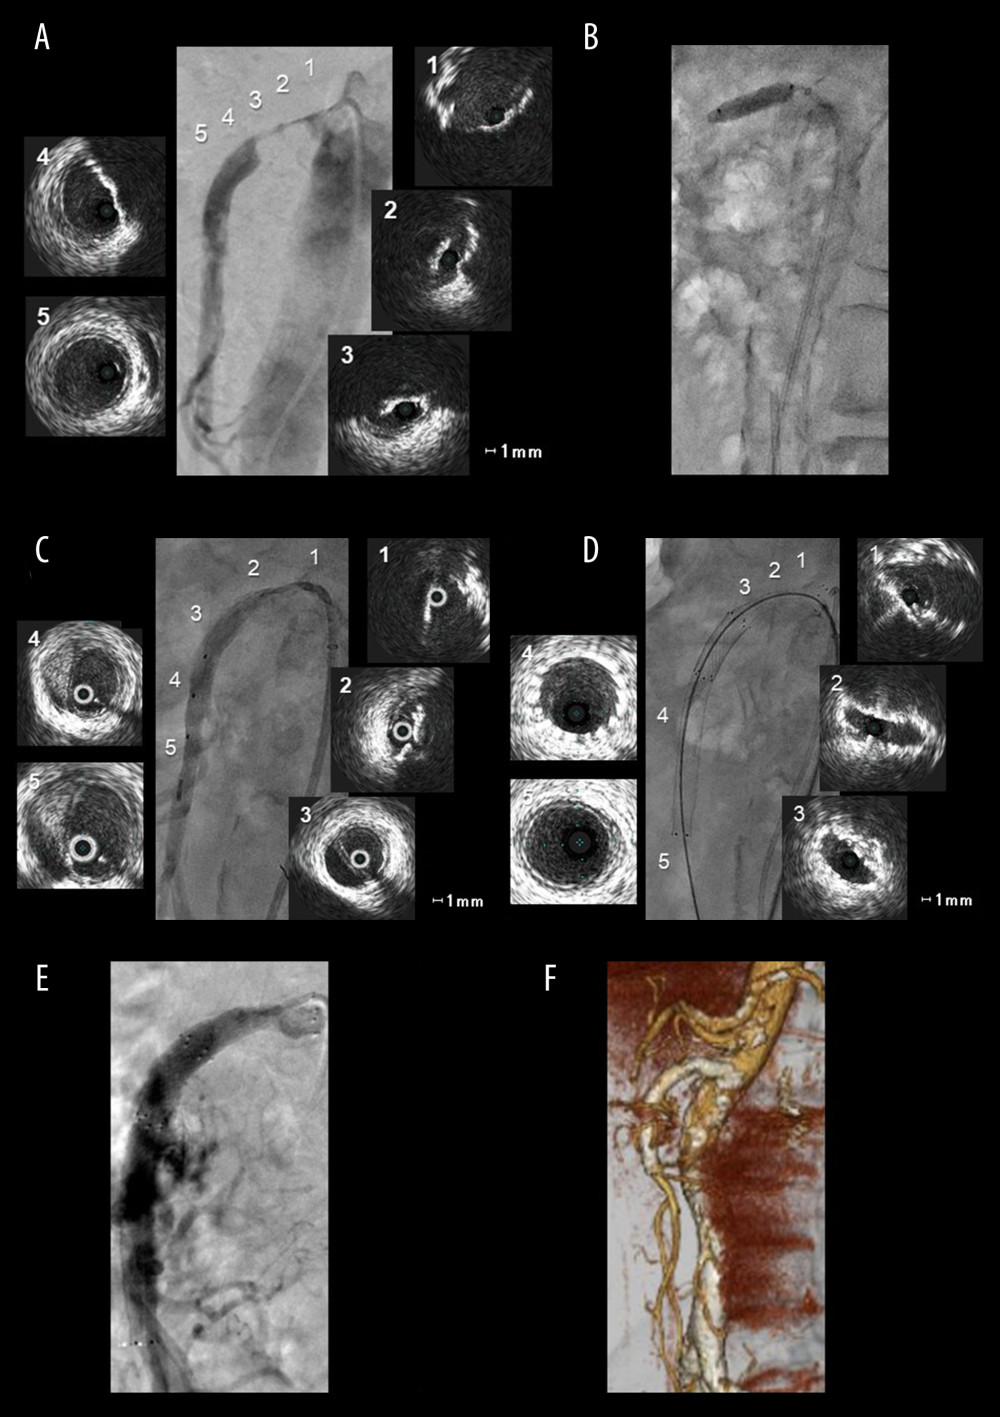 Pre-procedural angiography and intravascular ultrasound (IVUS) imaging of the superior mesenteric artery (SMA) (A). A cutting balloon was used to treat the stenosis of the SMA (B). Angiography after balloon angioplasty and intramural hematoma was observed with IVUS examination (C). Covering the whole dissection in the SMA with the implantation of self-expandable stents (D). Selective superior mesenteric angiography after endovascular therapy (E). The three-dimensional construction of computed tomography angiography after deployment of the self-expandable stents (F).